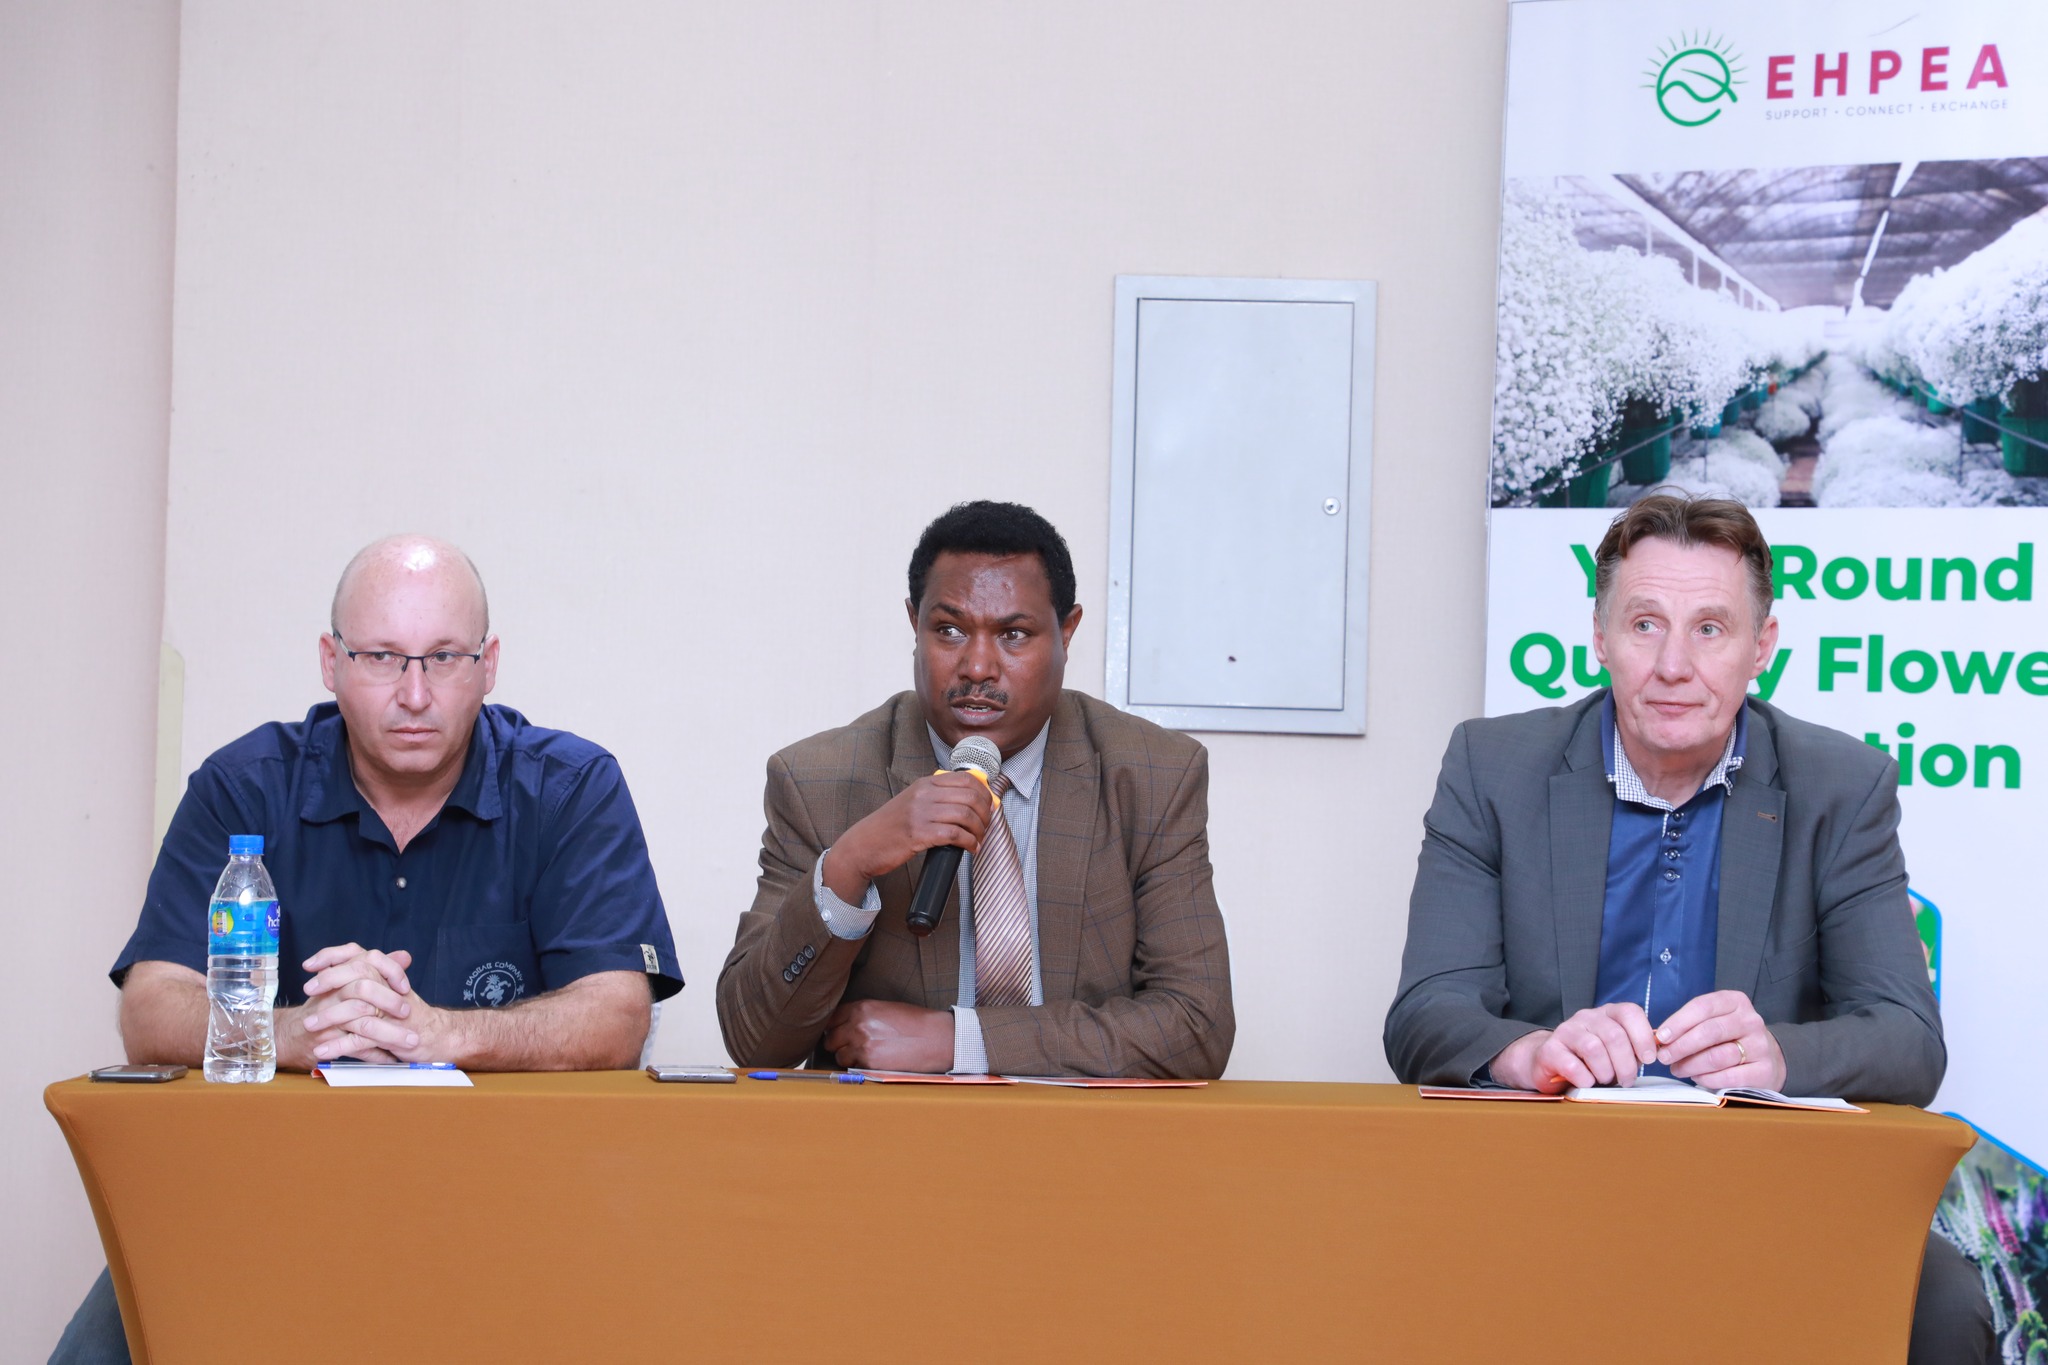 A discussion platform held on the possible courses of action to be taken by Rose farms with regard to FCM management